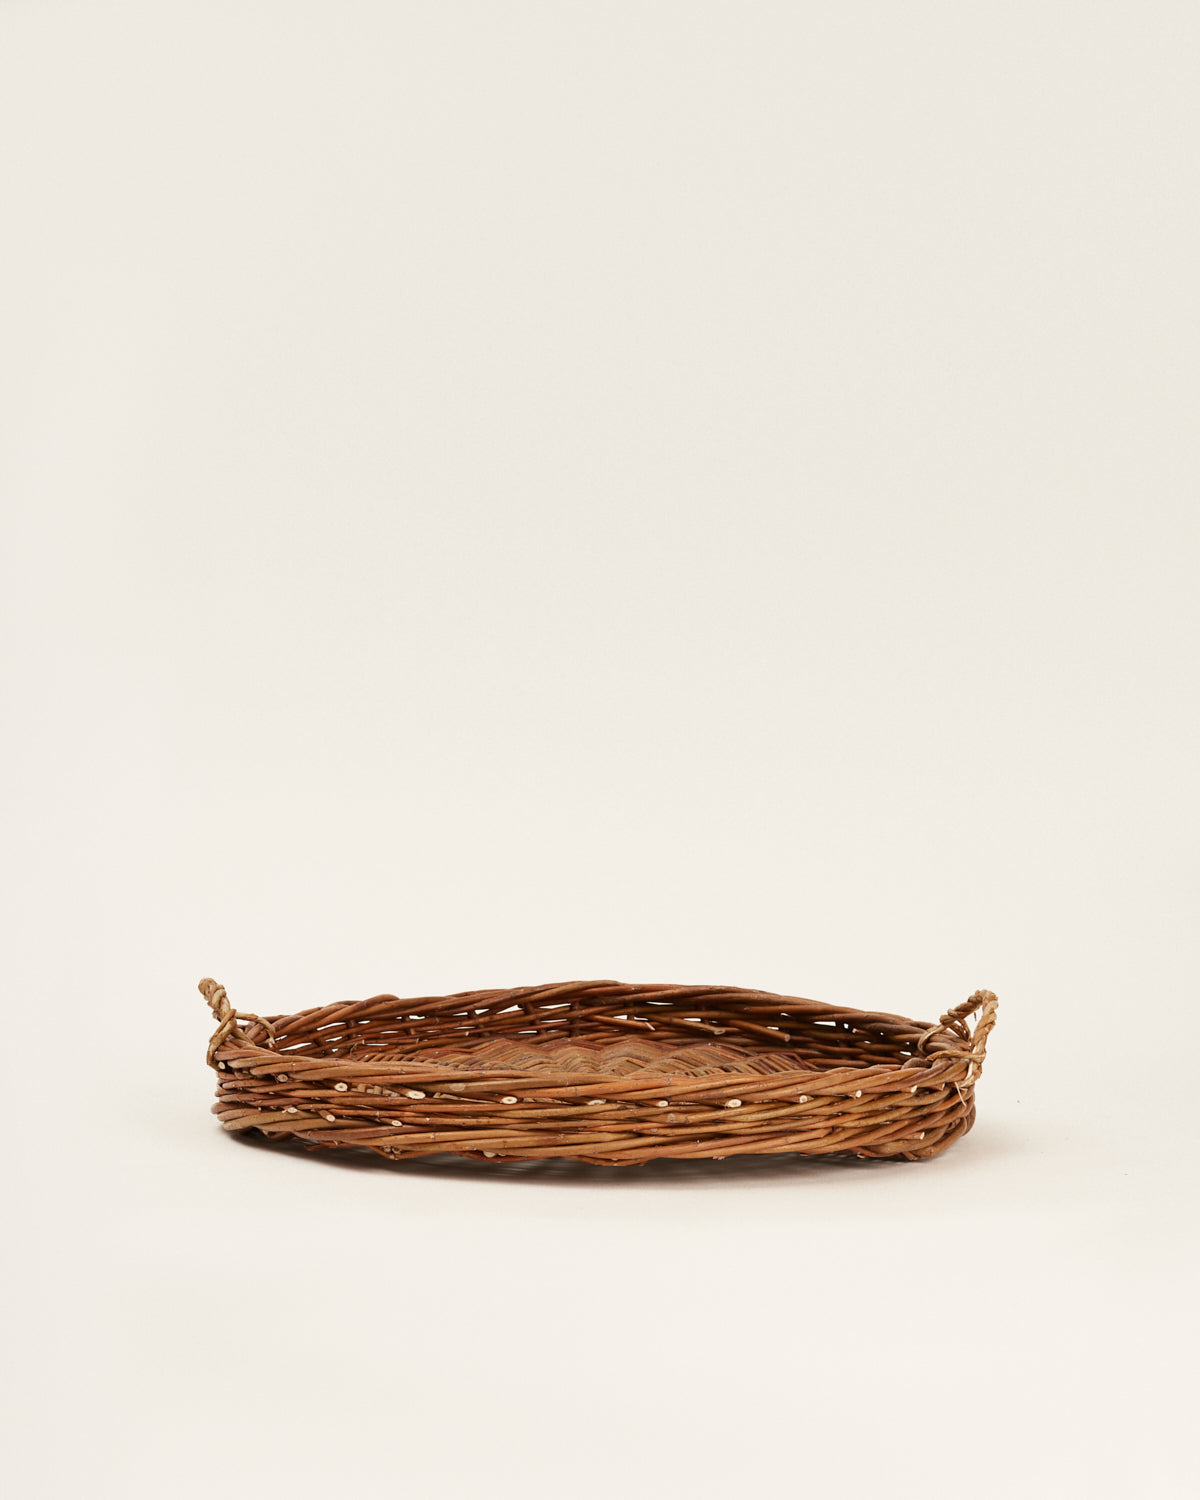 Wicker Tray with handles